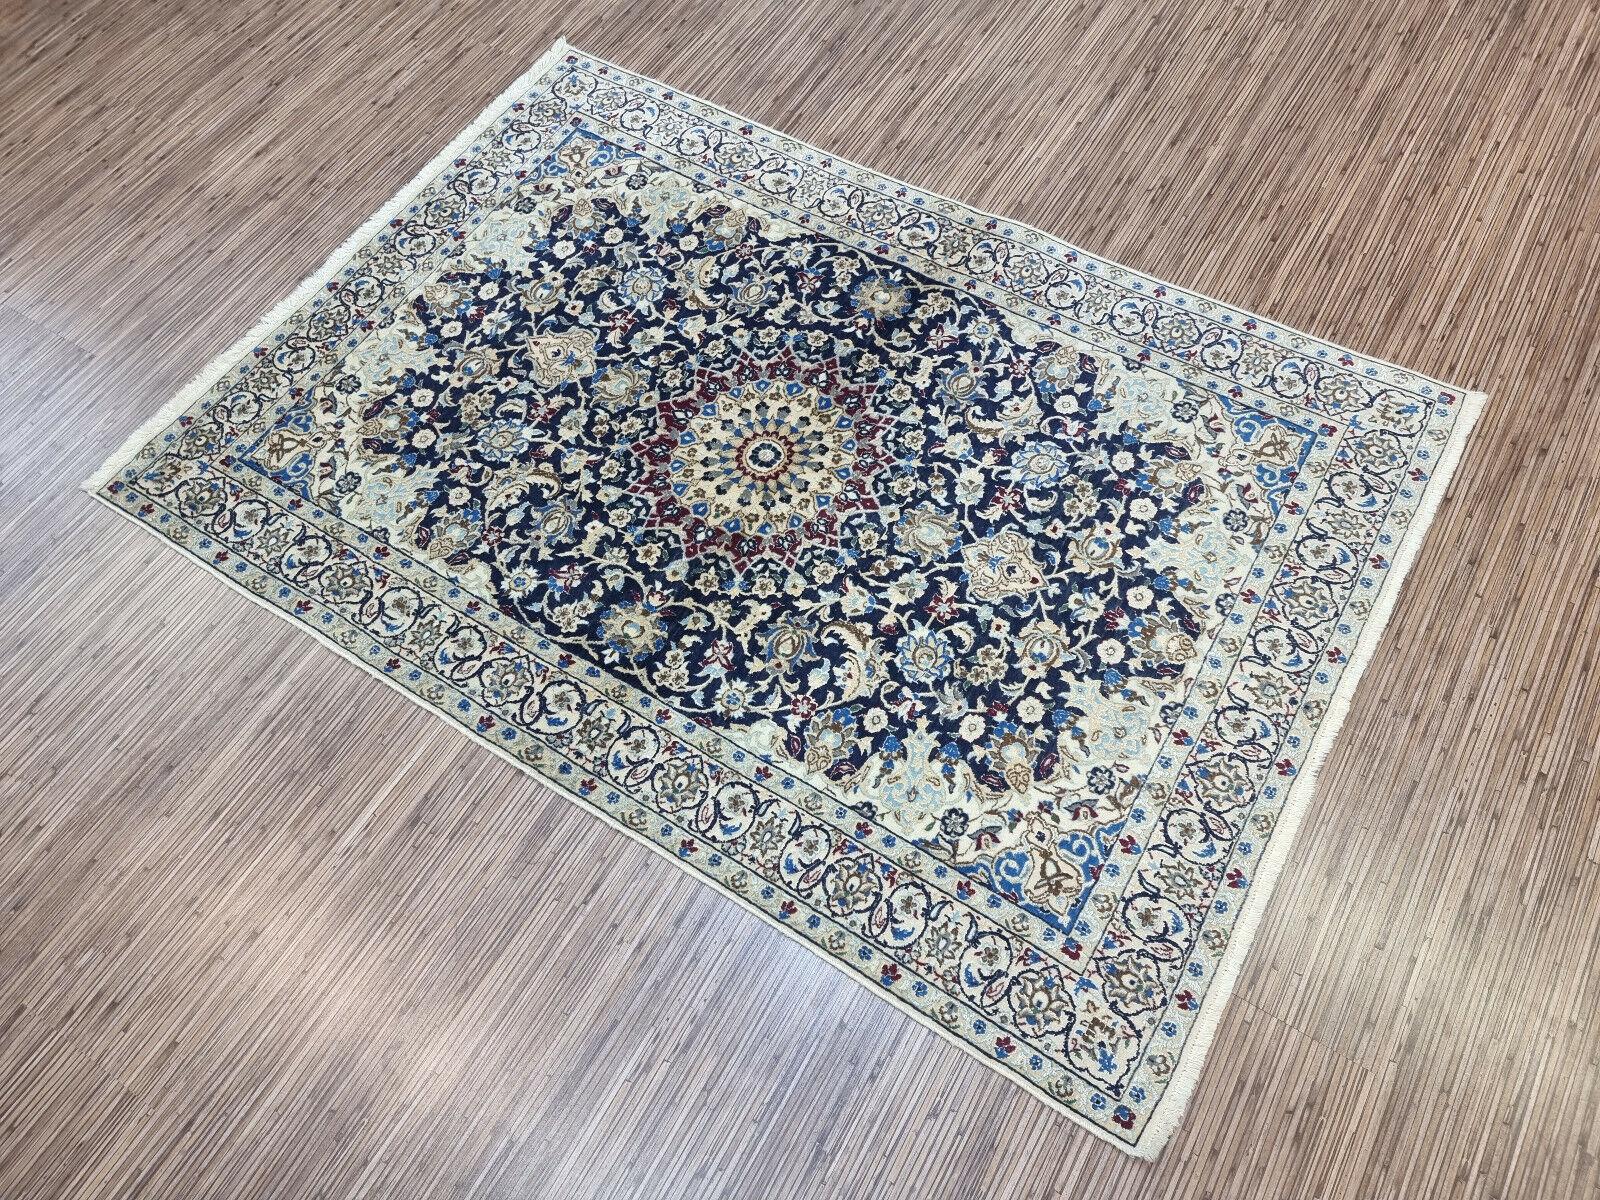 Immerse your living space in the elegance of the past with our Handmade Vintage Persian Style Nain Rug. Crafted meticulously in the 1980s, this exquisite piece measures 3.2’ x 4.6’, offering ample coverage for your floor. The rug is woven from